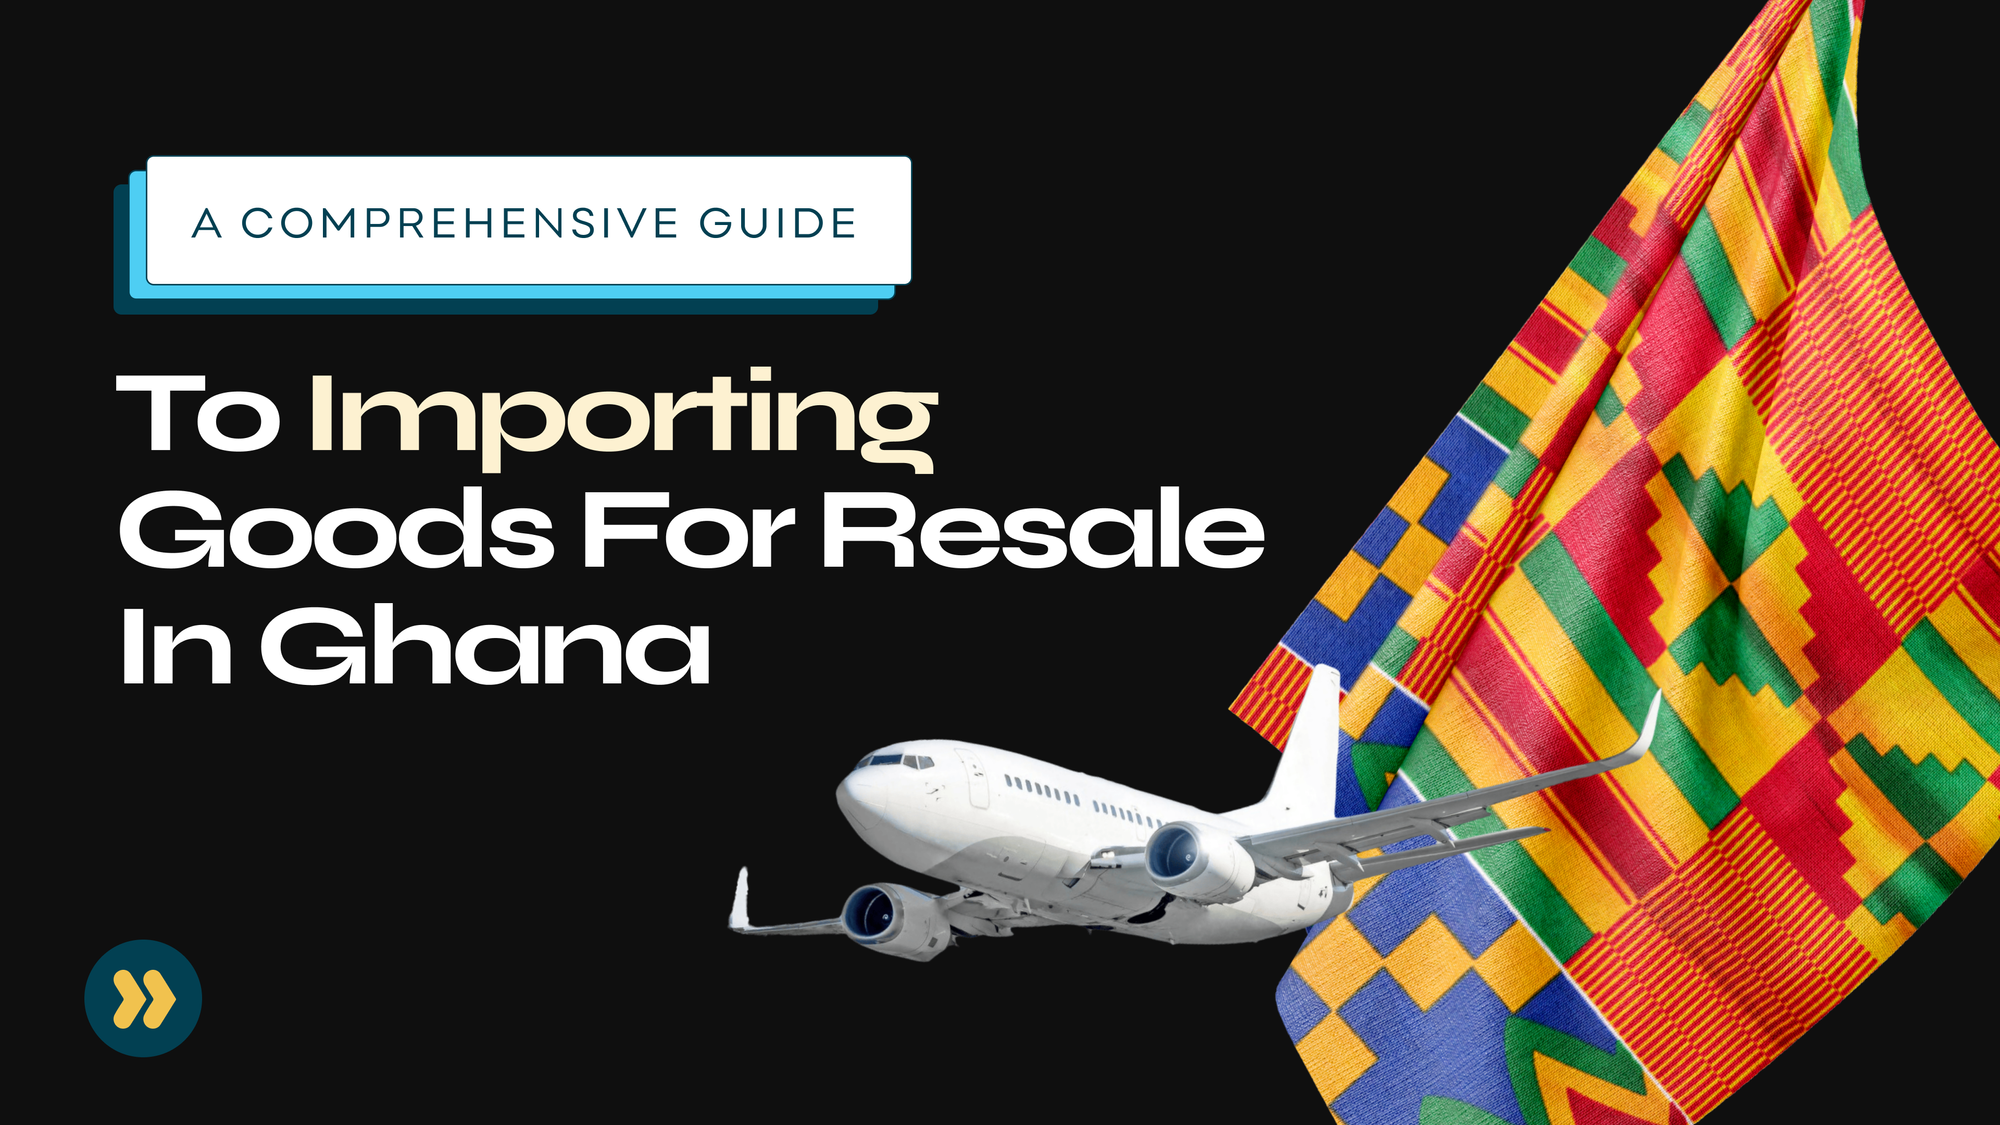 Your Comprehensive Guide to Importing Goods for Resale in Ghana